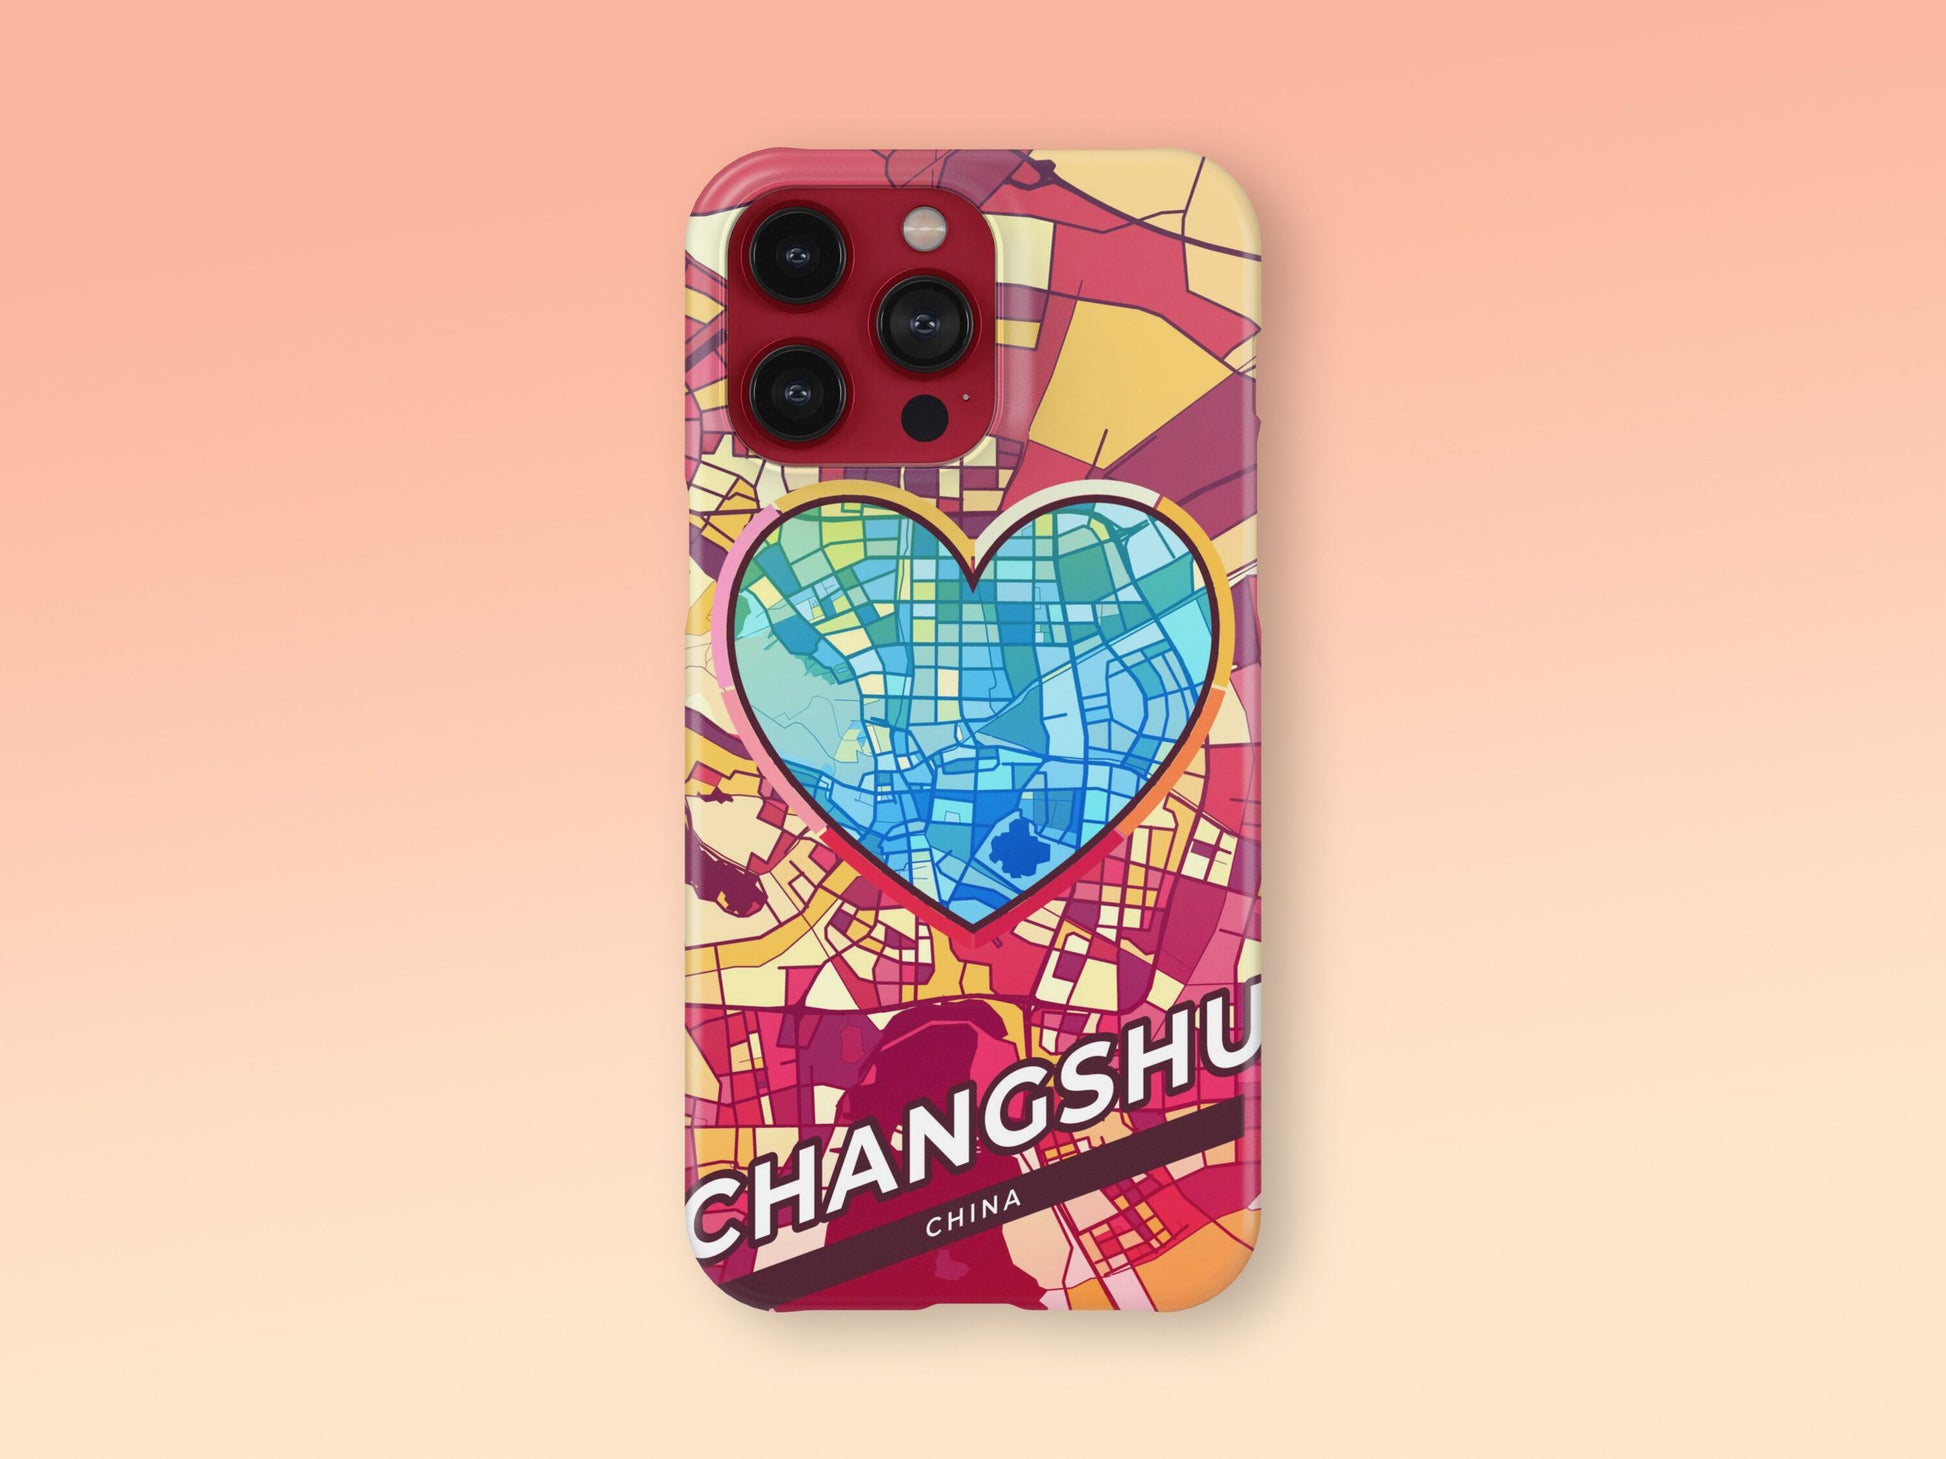 Changshu China slim phone case with colorful icon. Birthday, wedding or housewarming gift. Couple match cases. 2